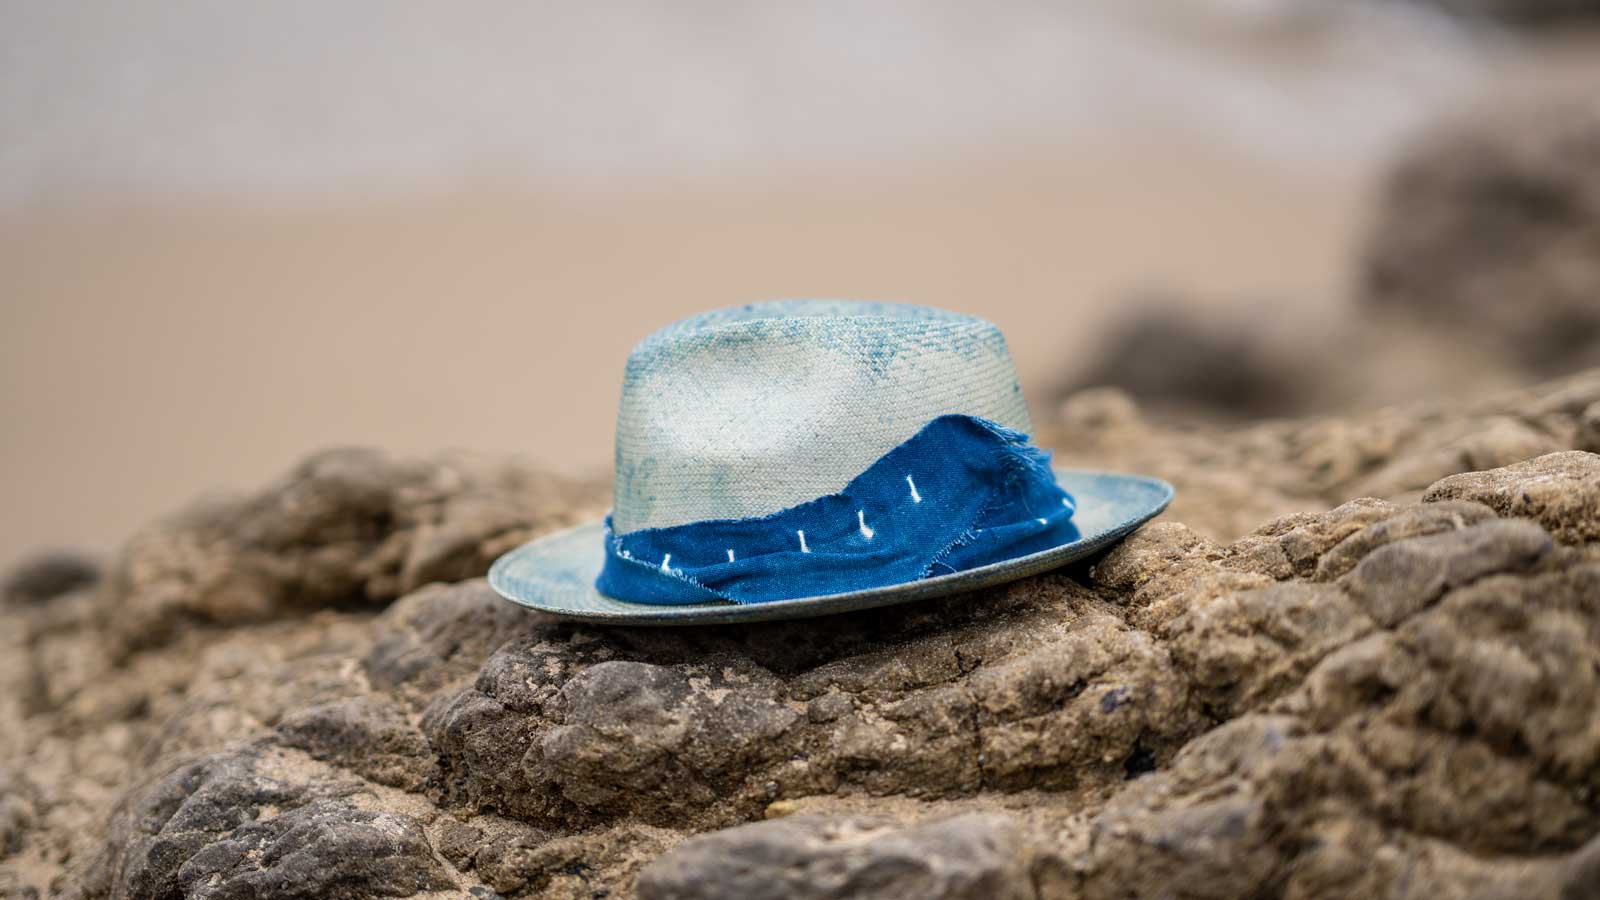 Design
Blend into the jungle. Our double-dipped indigo dyed Ecuadorian Straw is as fun in Tulum as it is poolside in Palm Springs. Take it wherever you go.
Material
Double dipped Ecuadorian straw crown
Specifications
Comes with a 2 5/8 brim with a 4 semi teardrop crown. Handcrafted at our atelier in NYC.